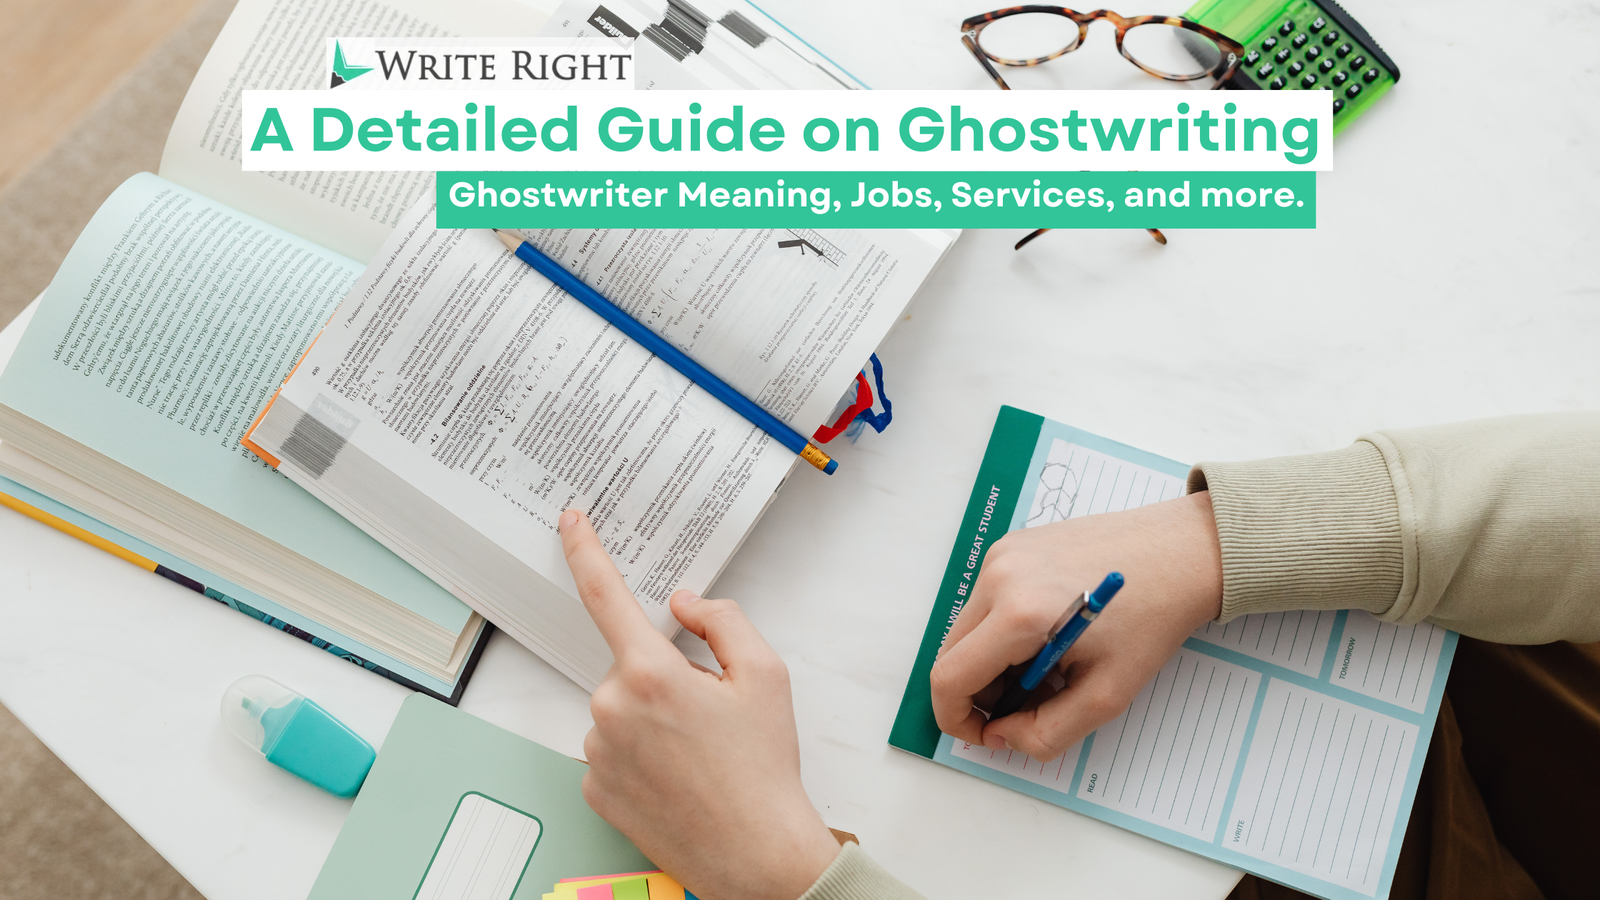 A Detailed Guide on Ghostwriting: Ghostwriter Meaning, Ghostwriting Jobs, Ghostwriting Services, and more.